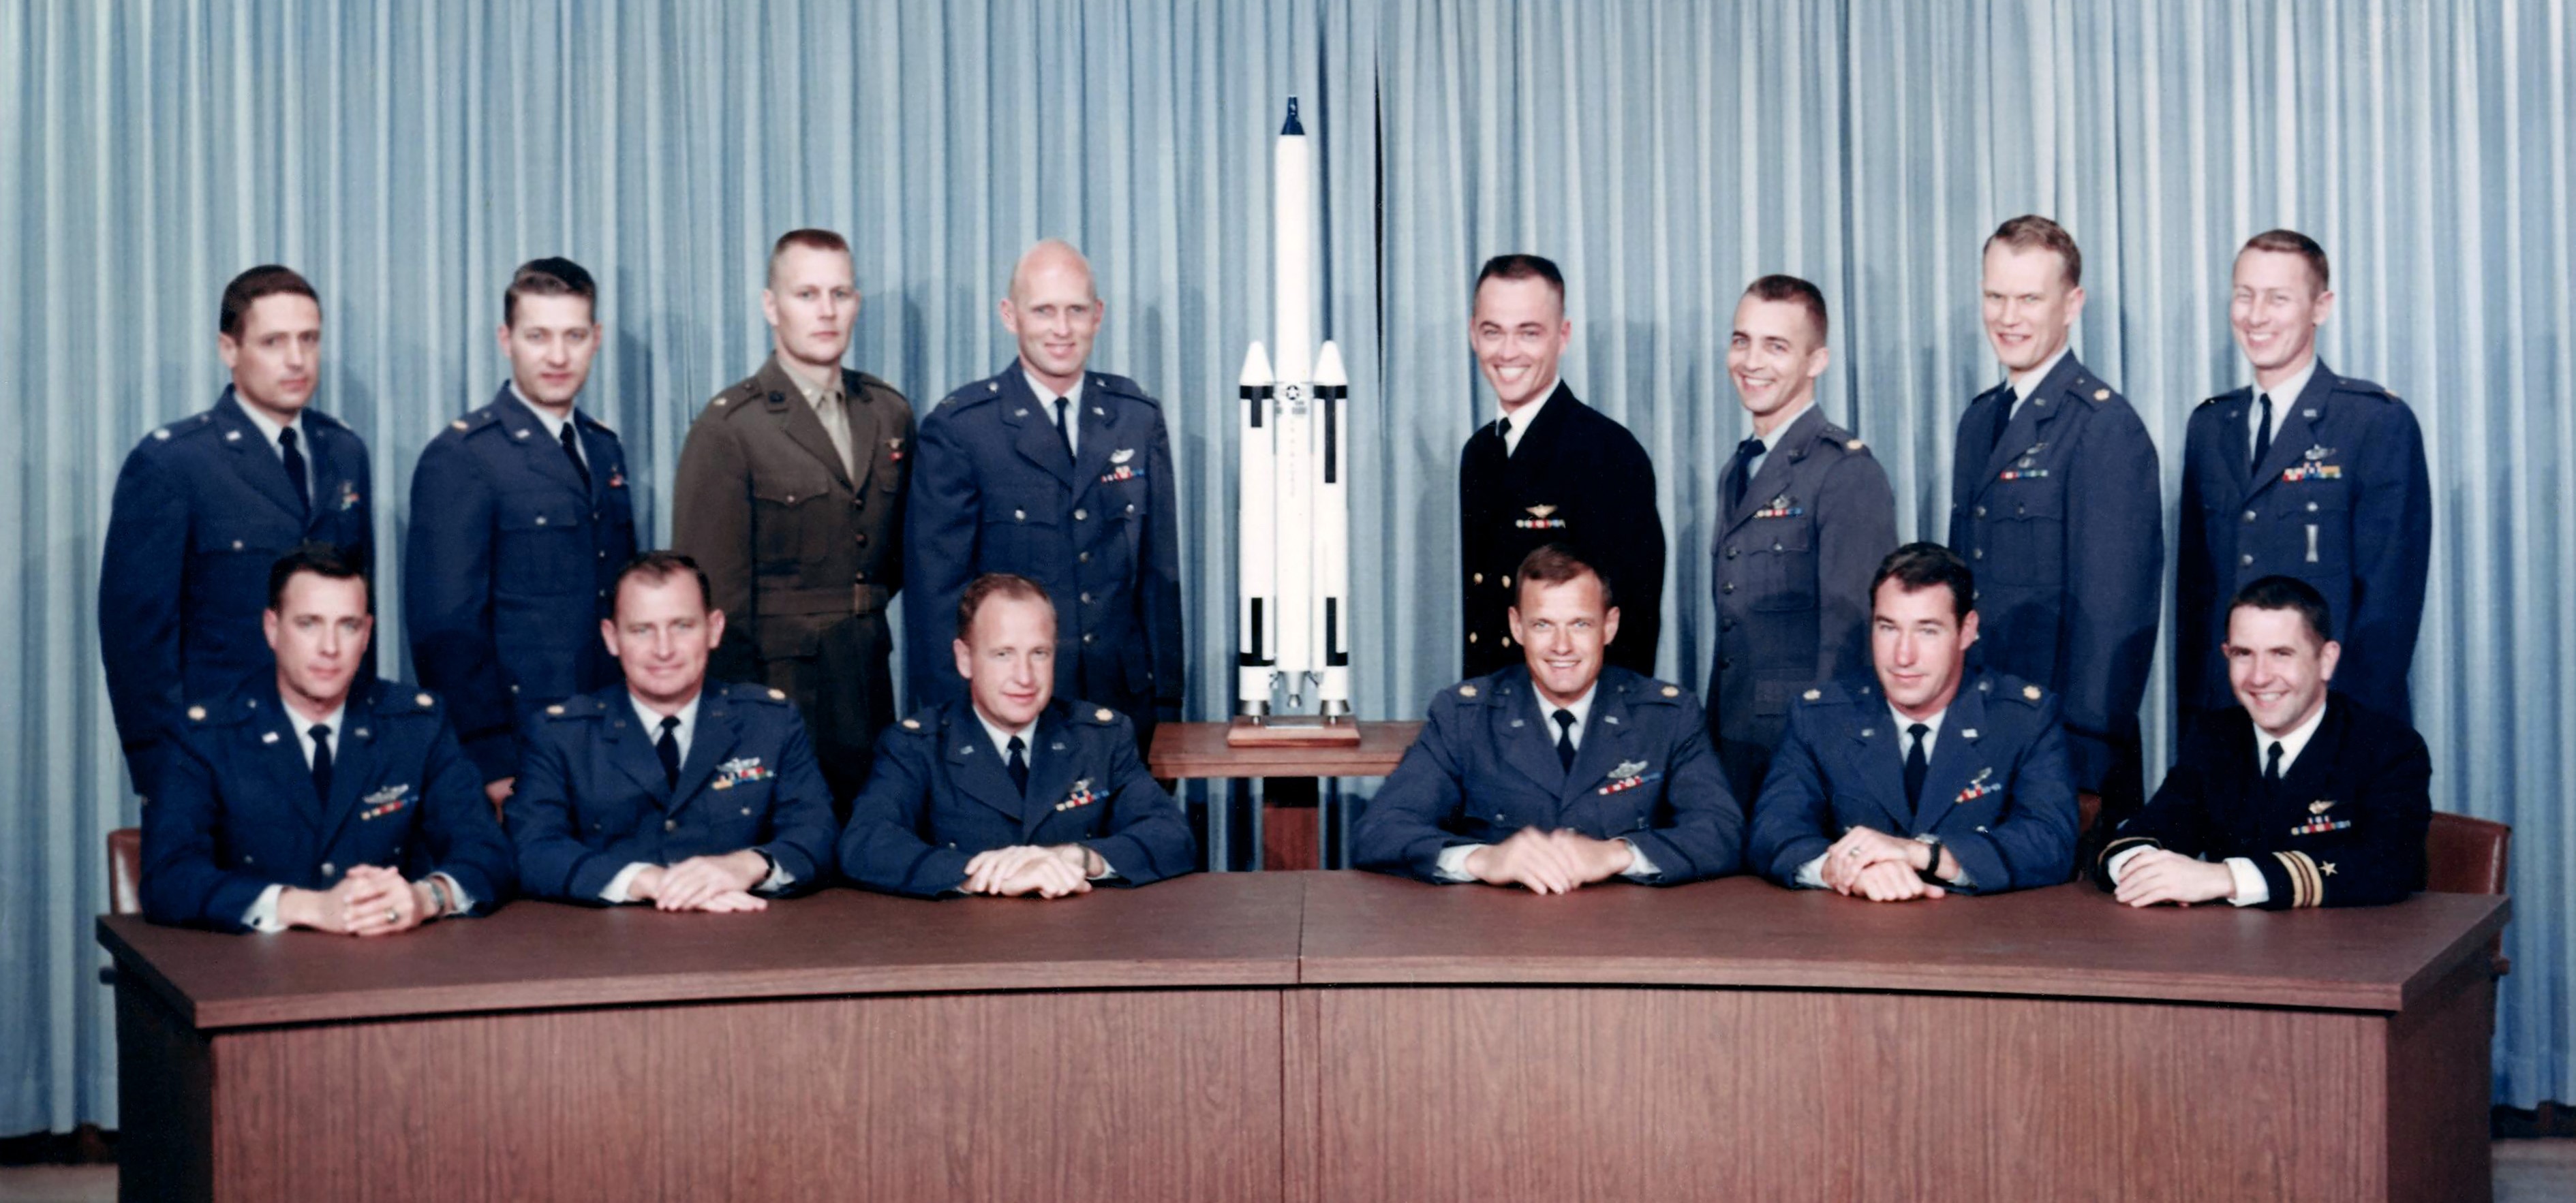 Group photo of 14 of the 15 Manned Orbiting Laboratory pilots still in the program in early 1968